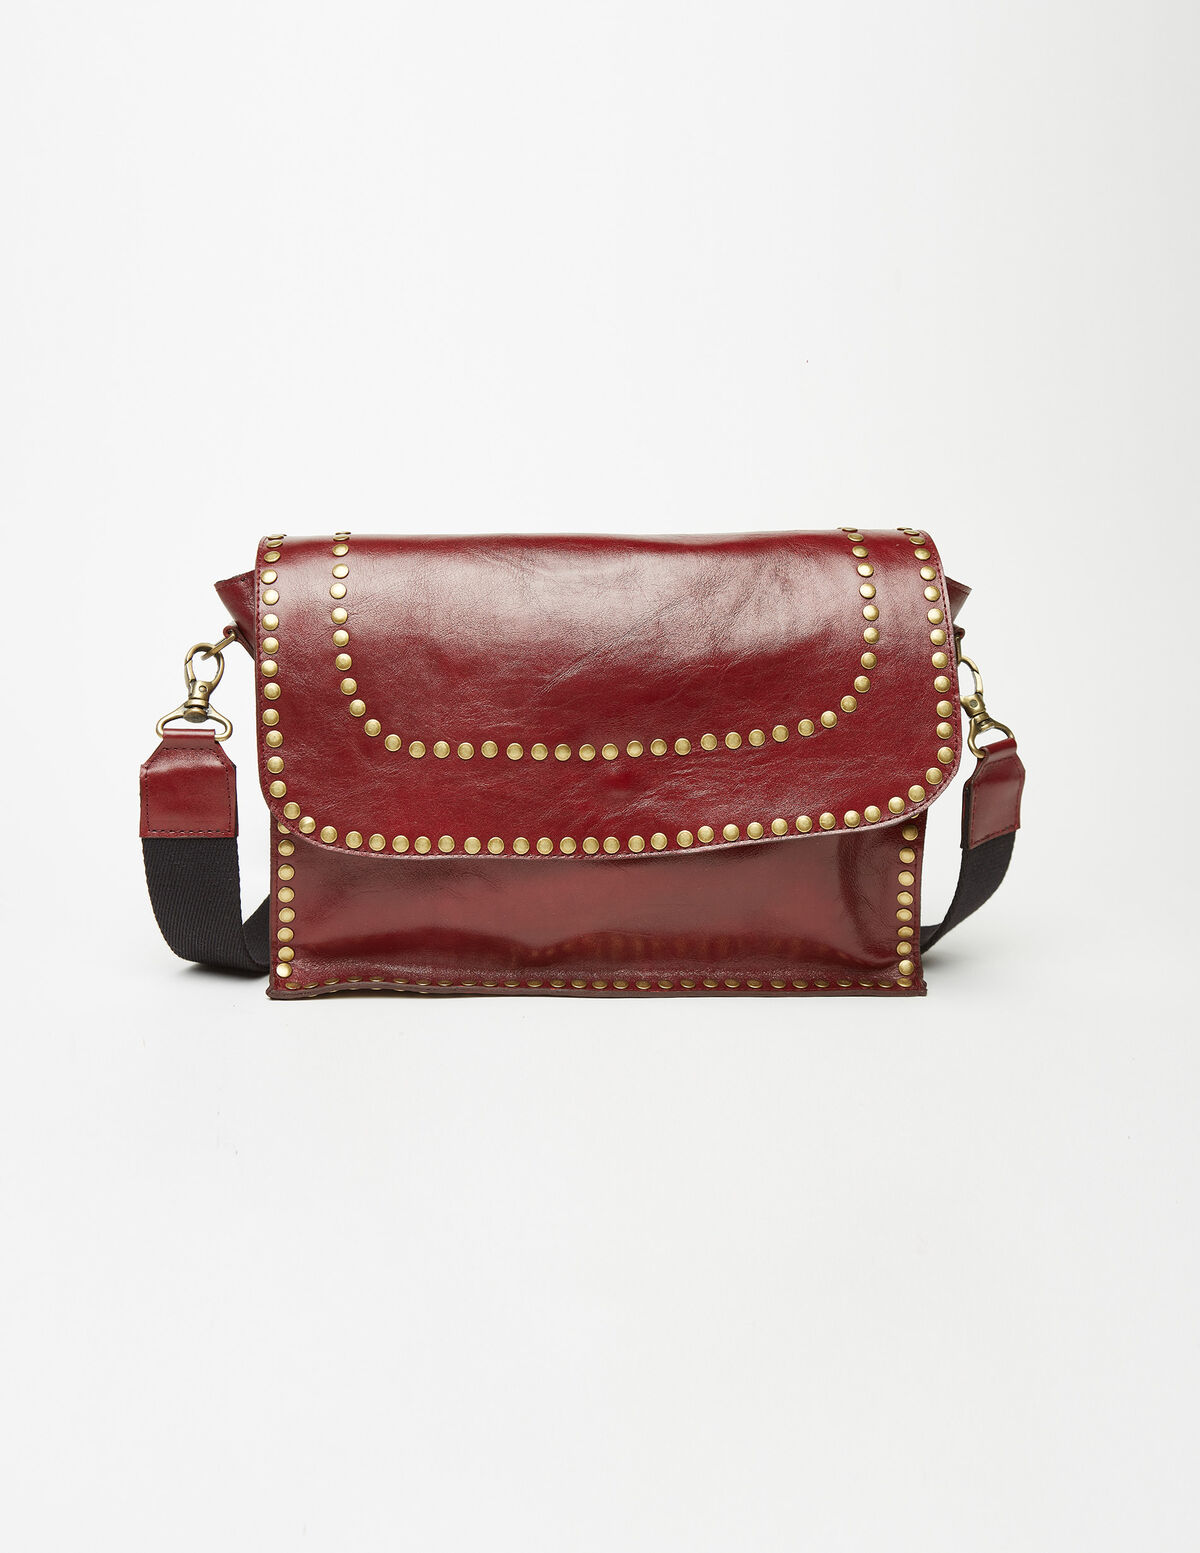 The 'N' Bag in maroon - View all - Nícoli